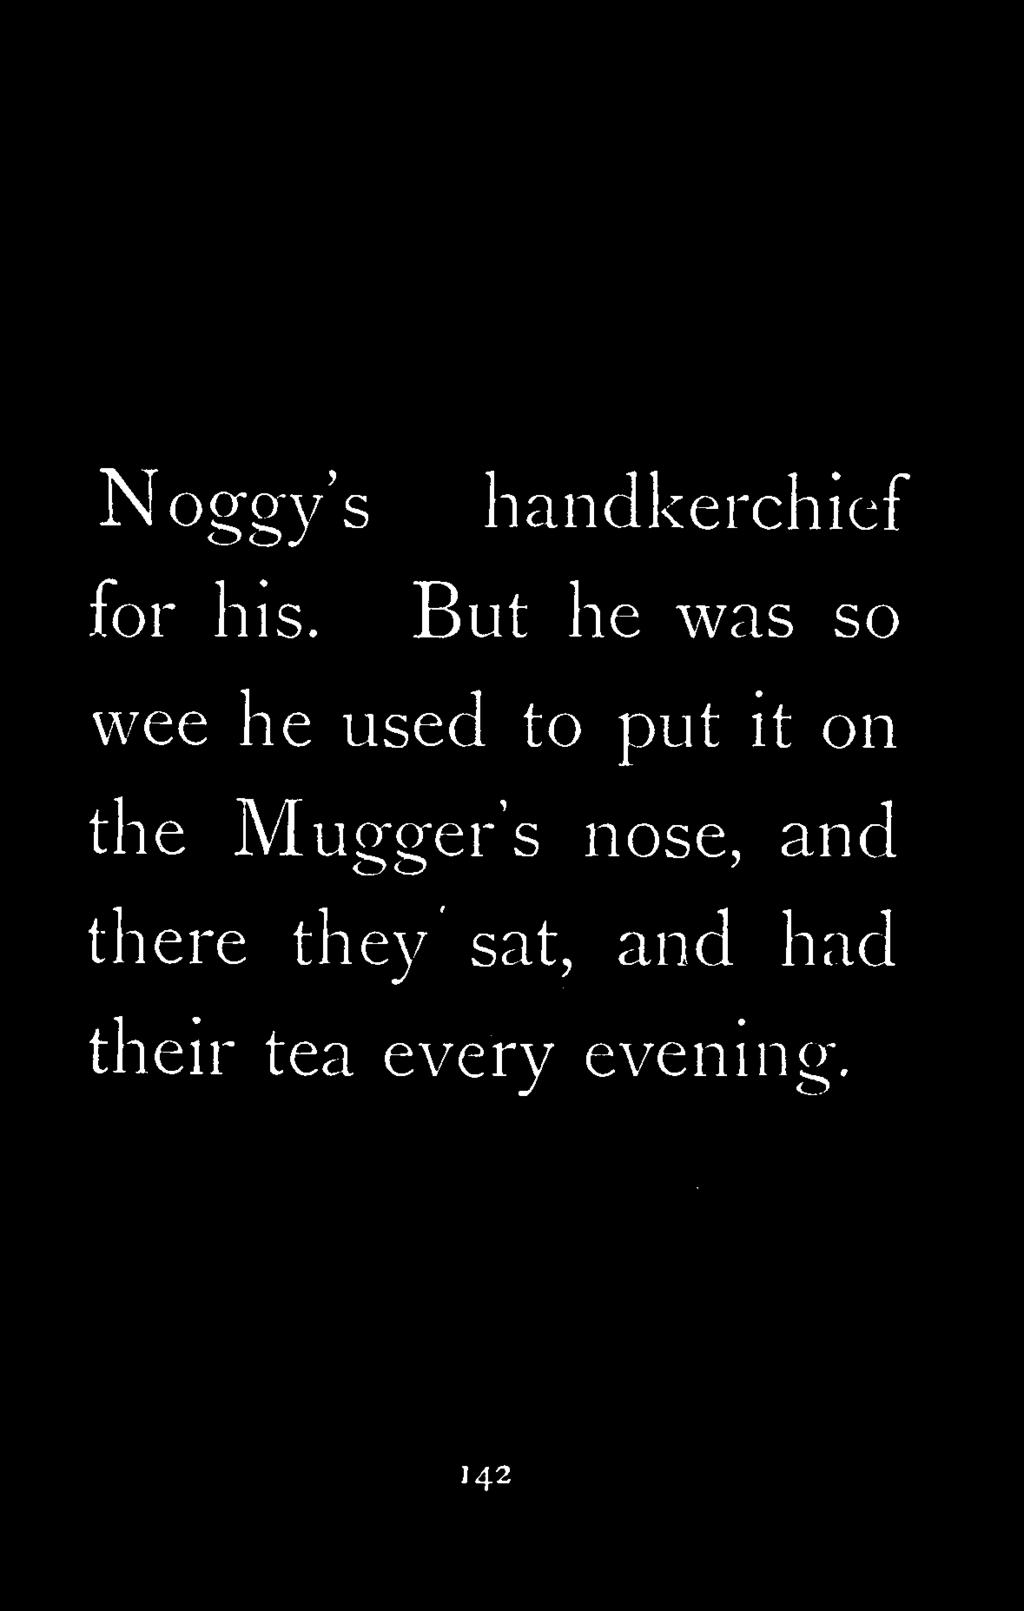 on the Mugger s nose, and there